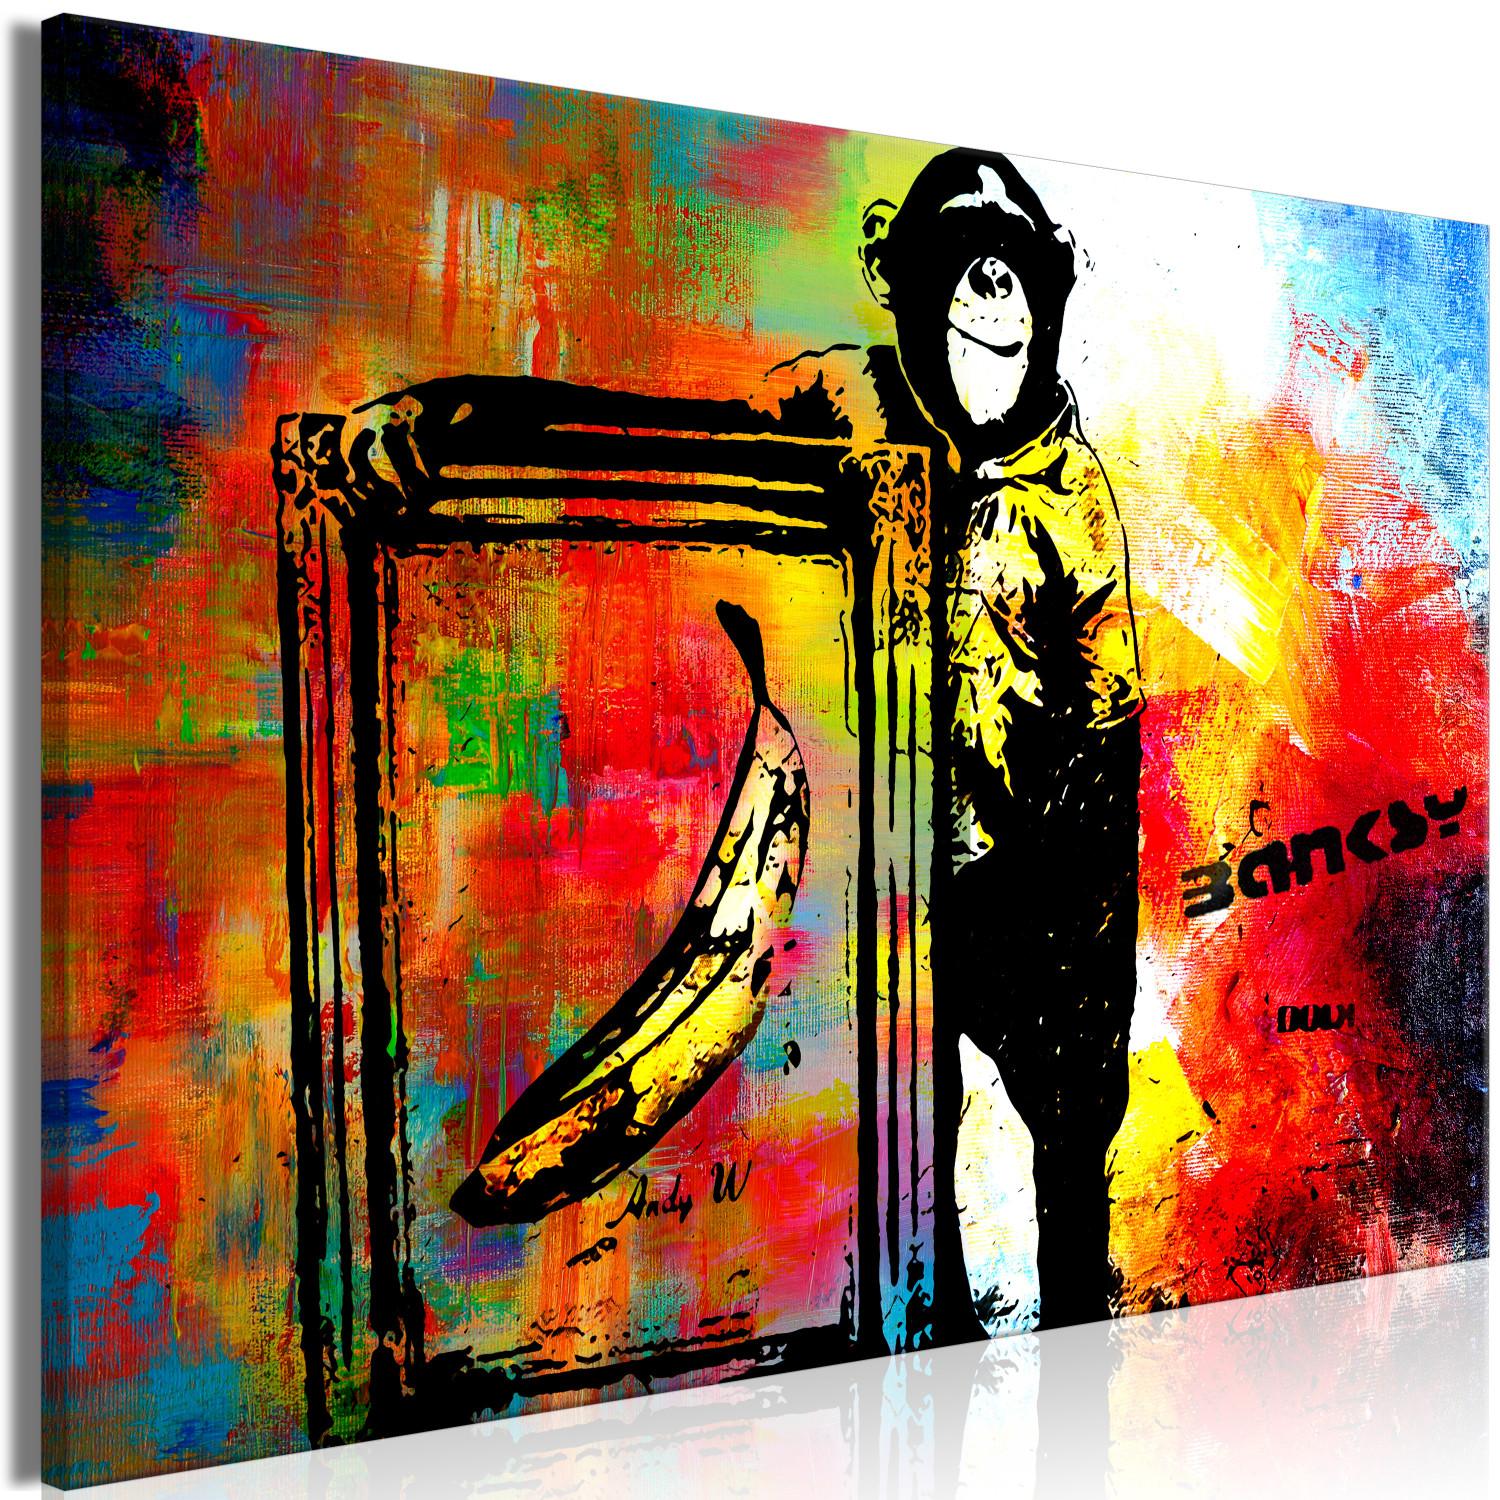 Canvas Monkey with Banana (1-piece) - Banksy-style mural on a colorful background